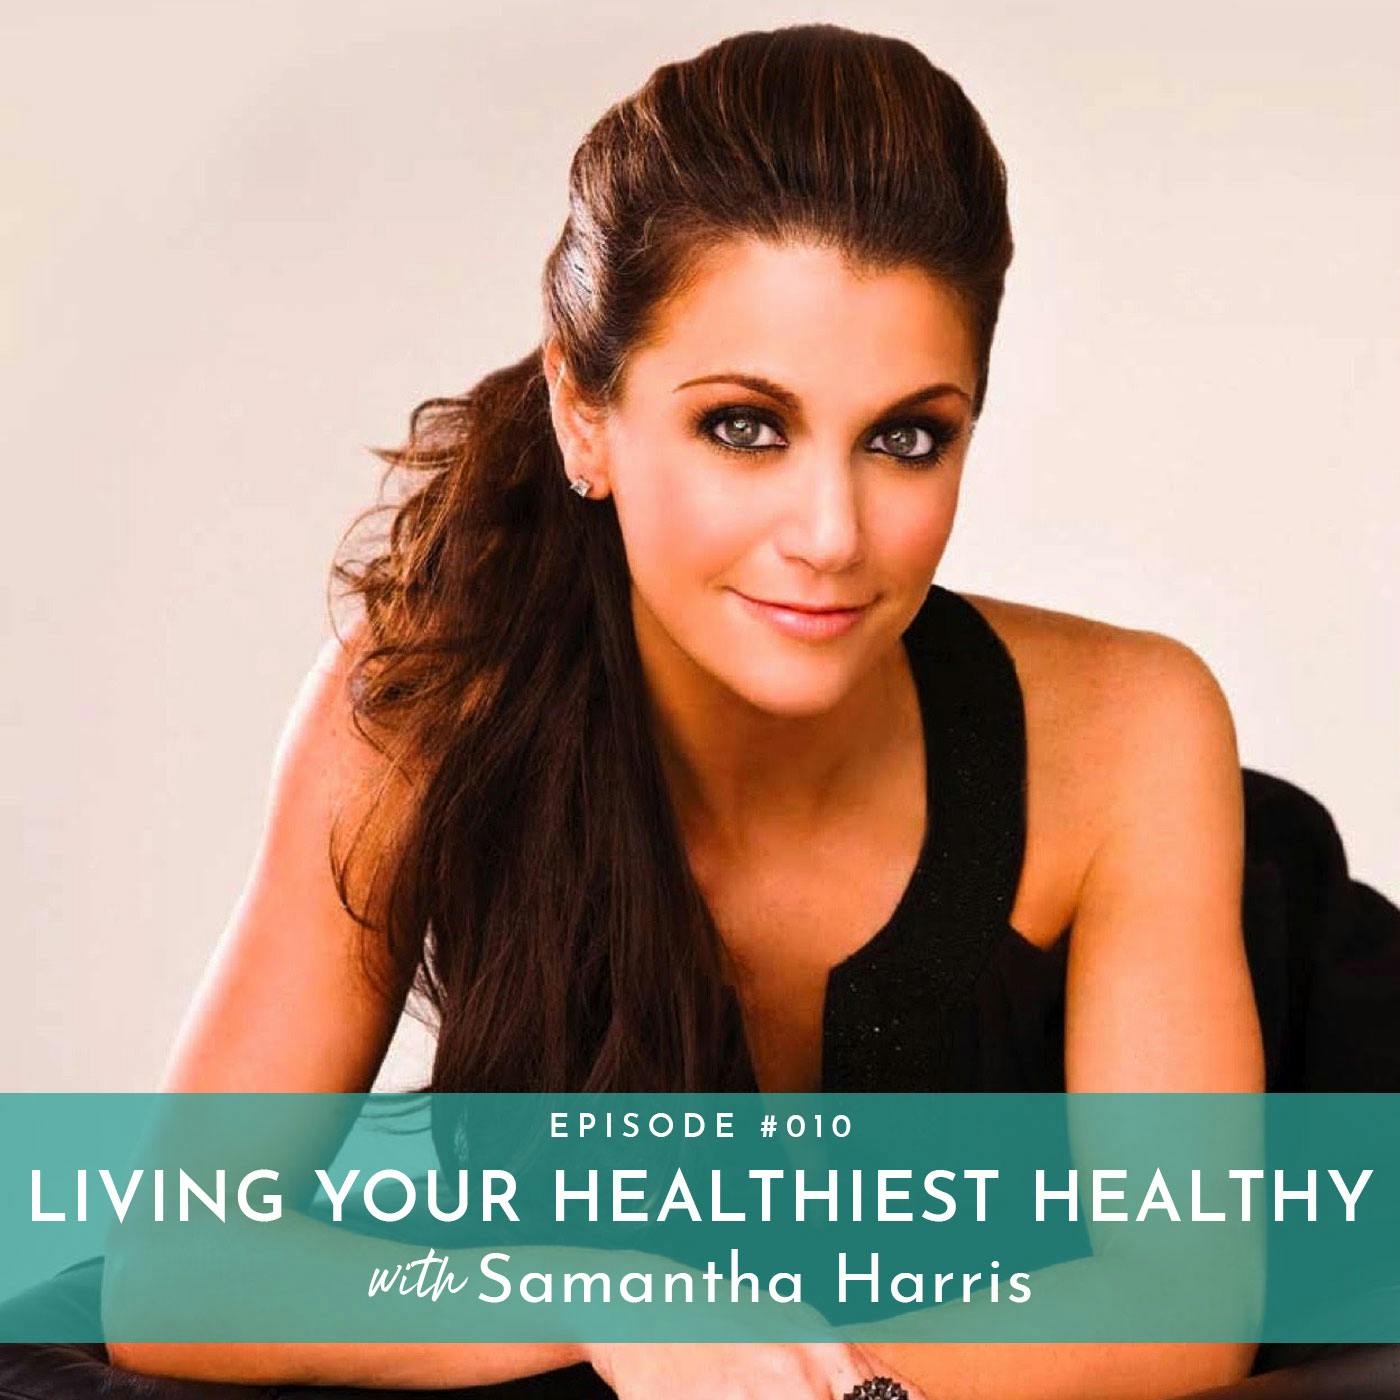 Living Your Healthiest Healthy with Samantha Harris